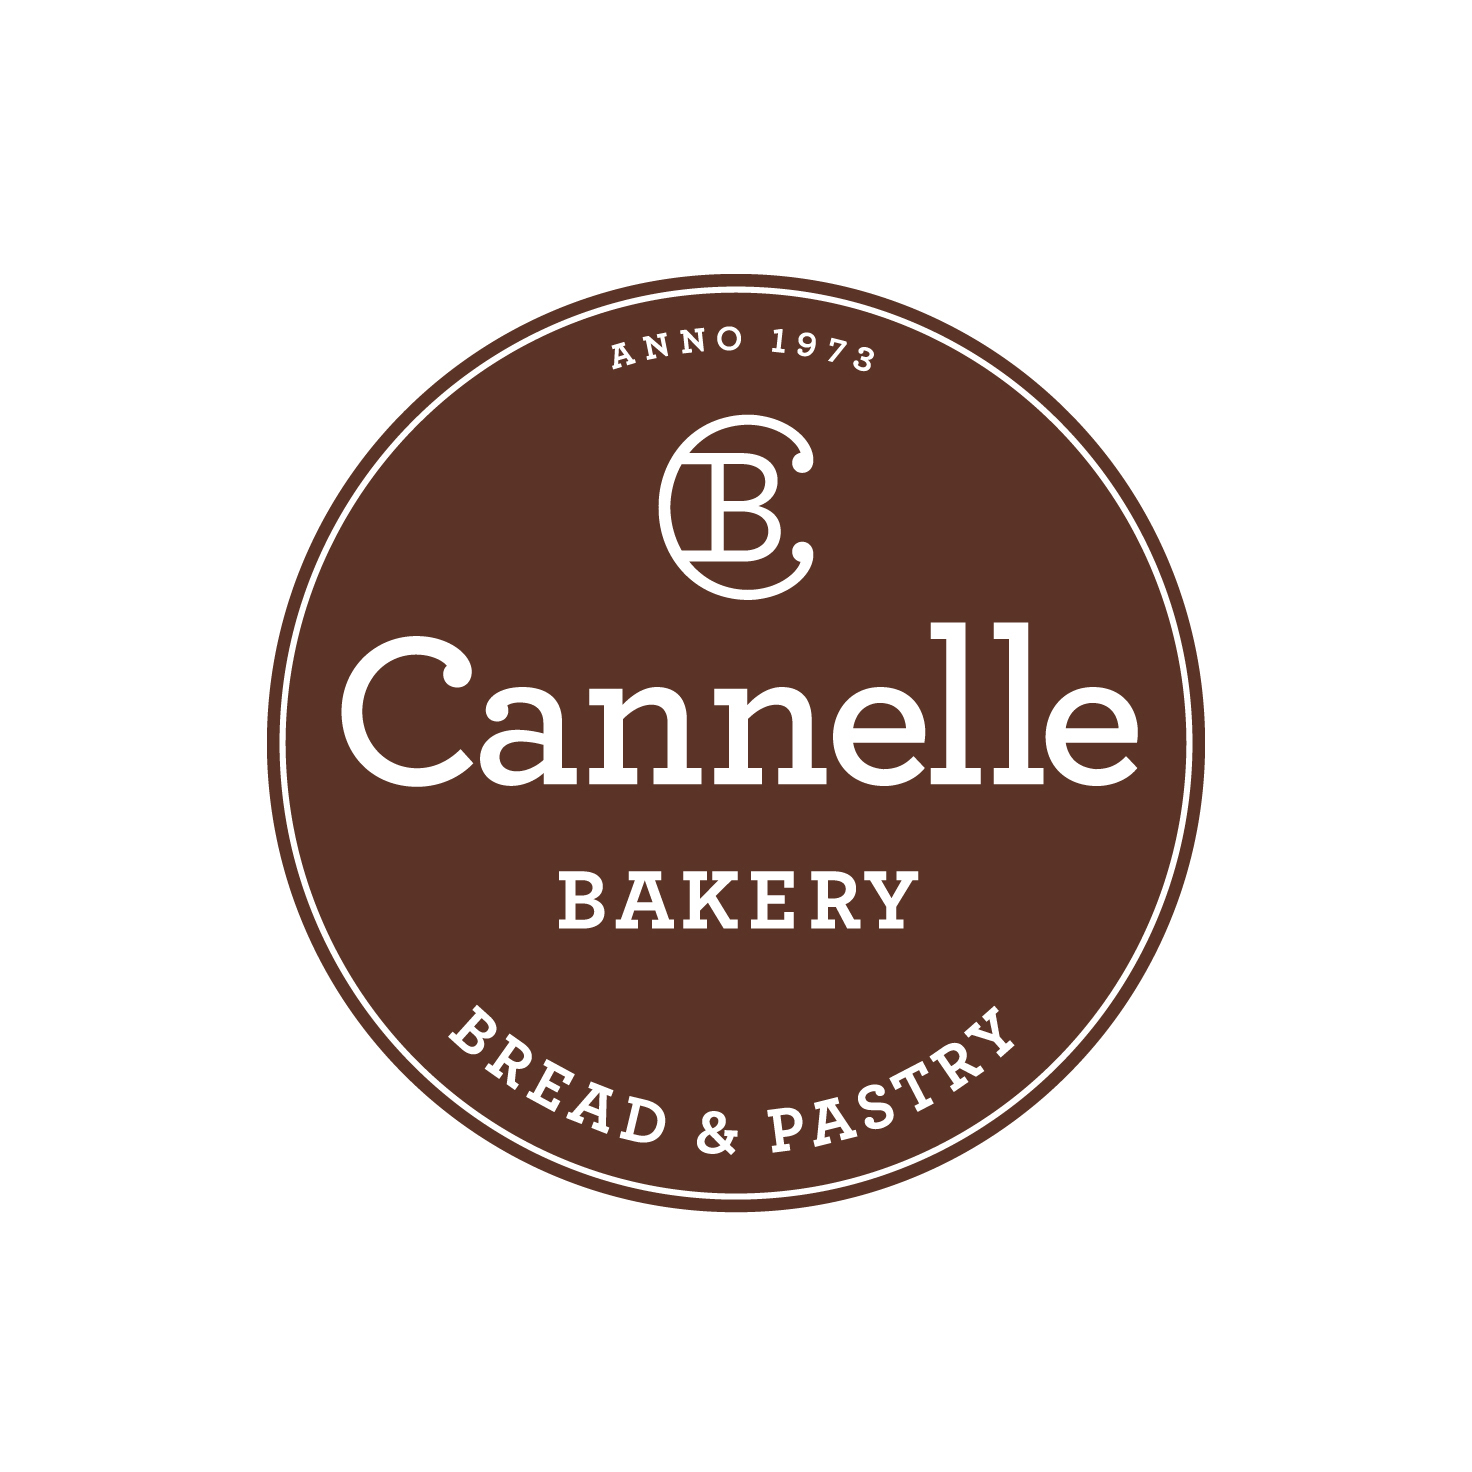 Cannelle logo